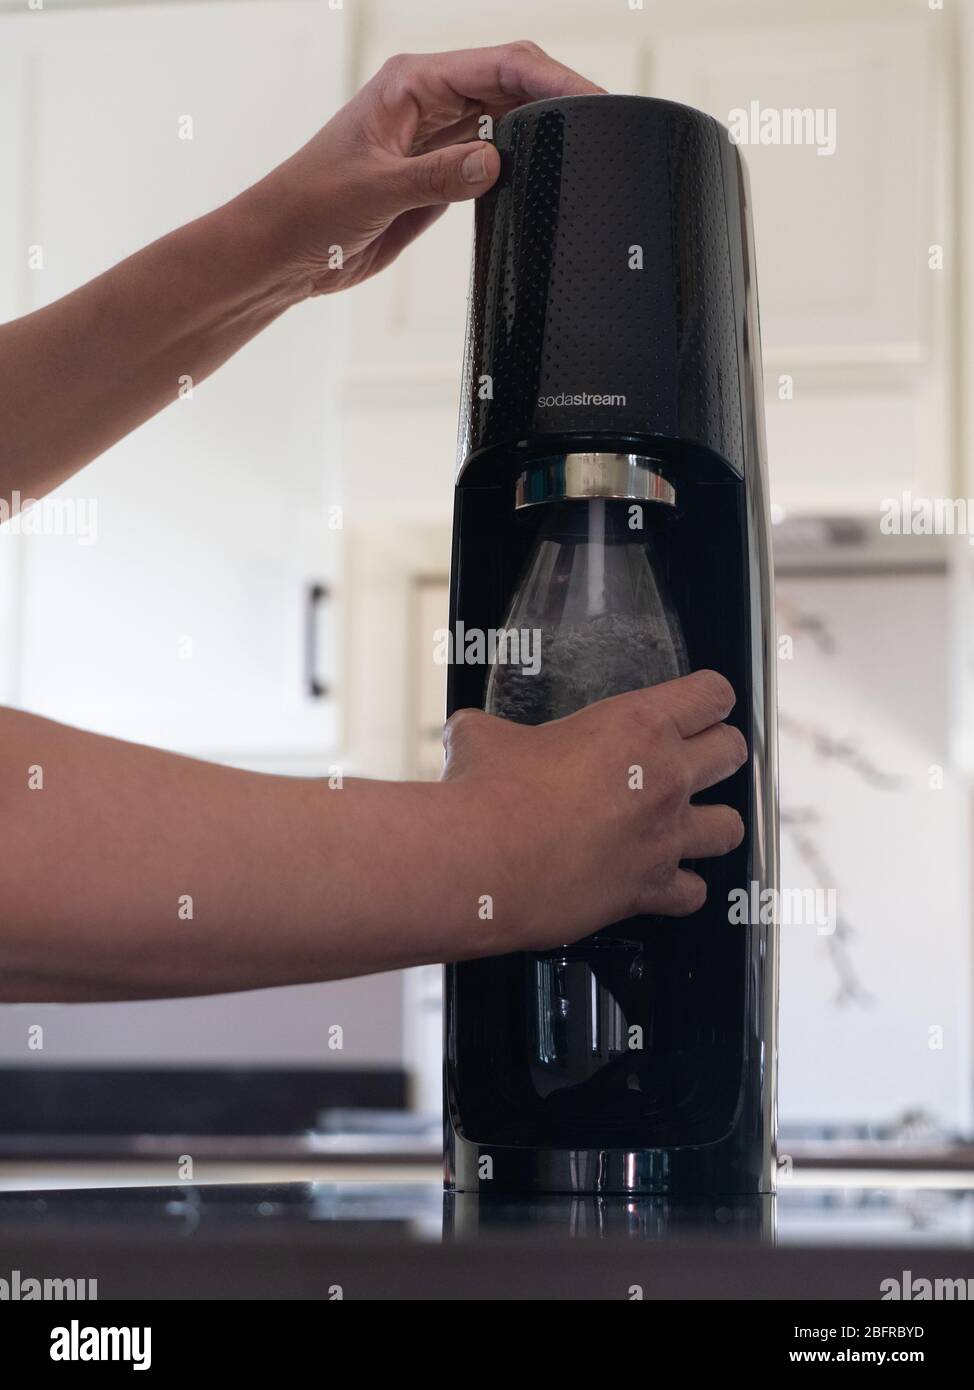 Latina woman holding a reusable Sodastream bottle as she carbonates the water it contains. Photographed in modern kitchen with shallow depth of field. Stock Photo